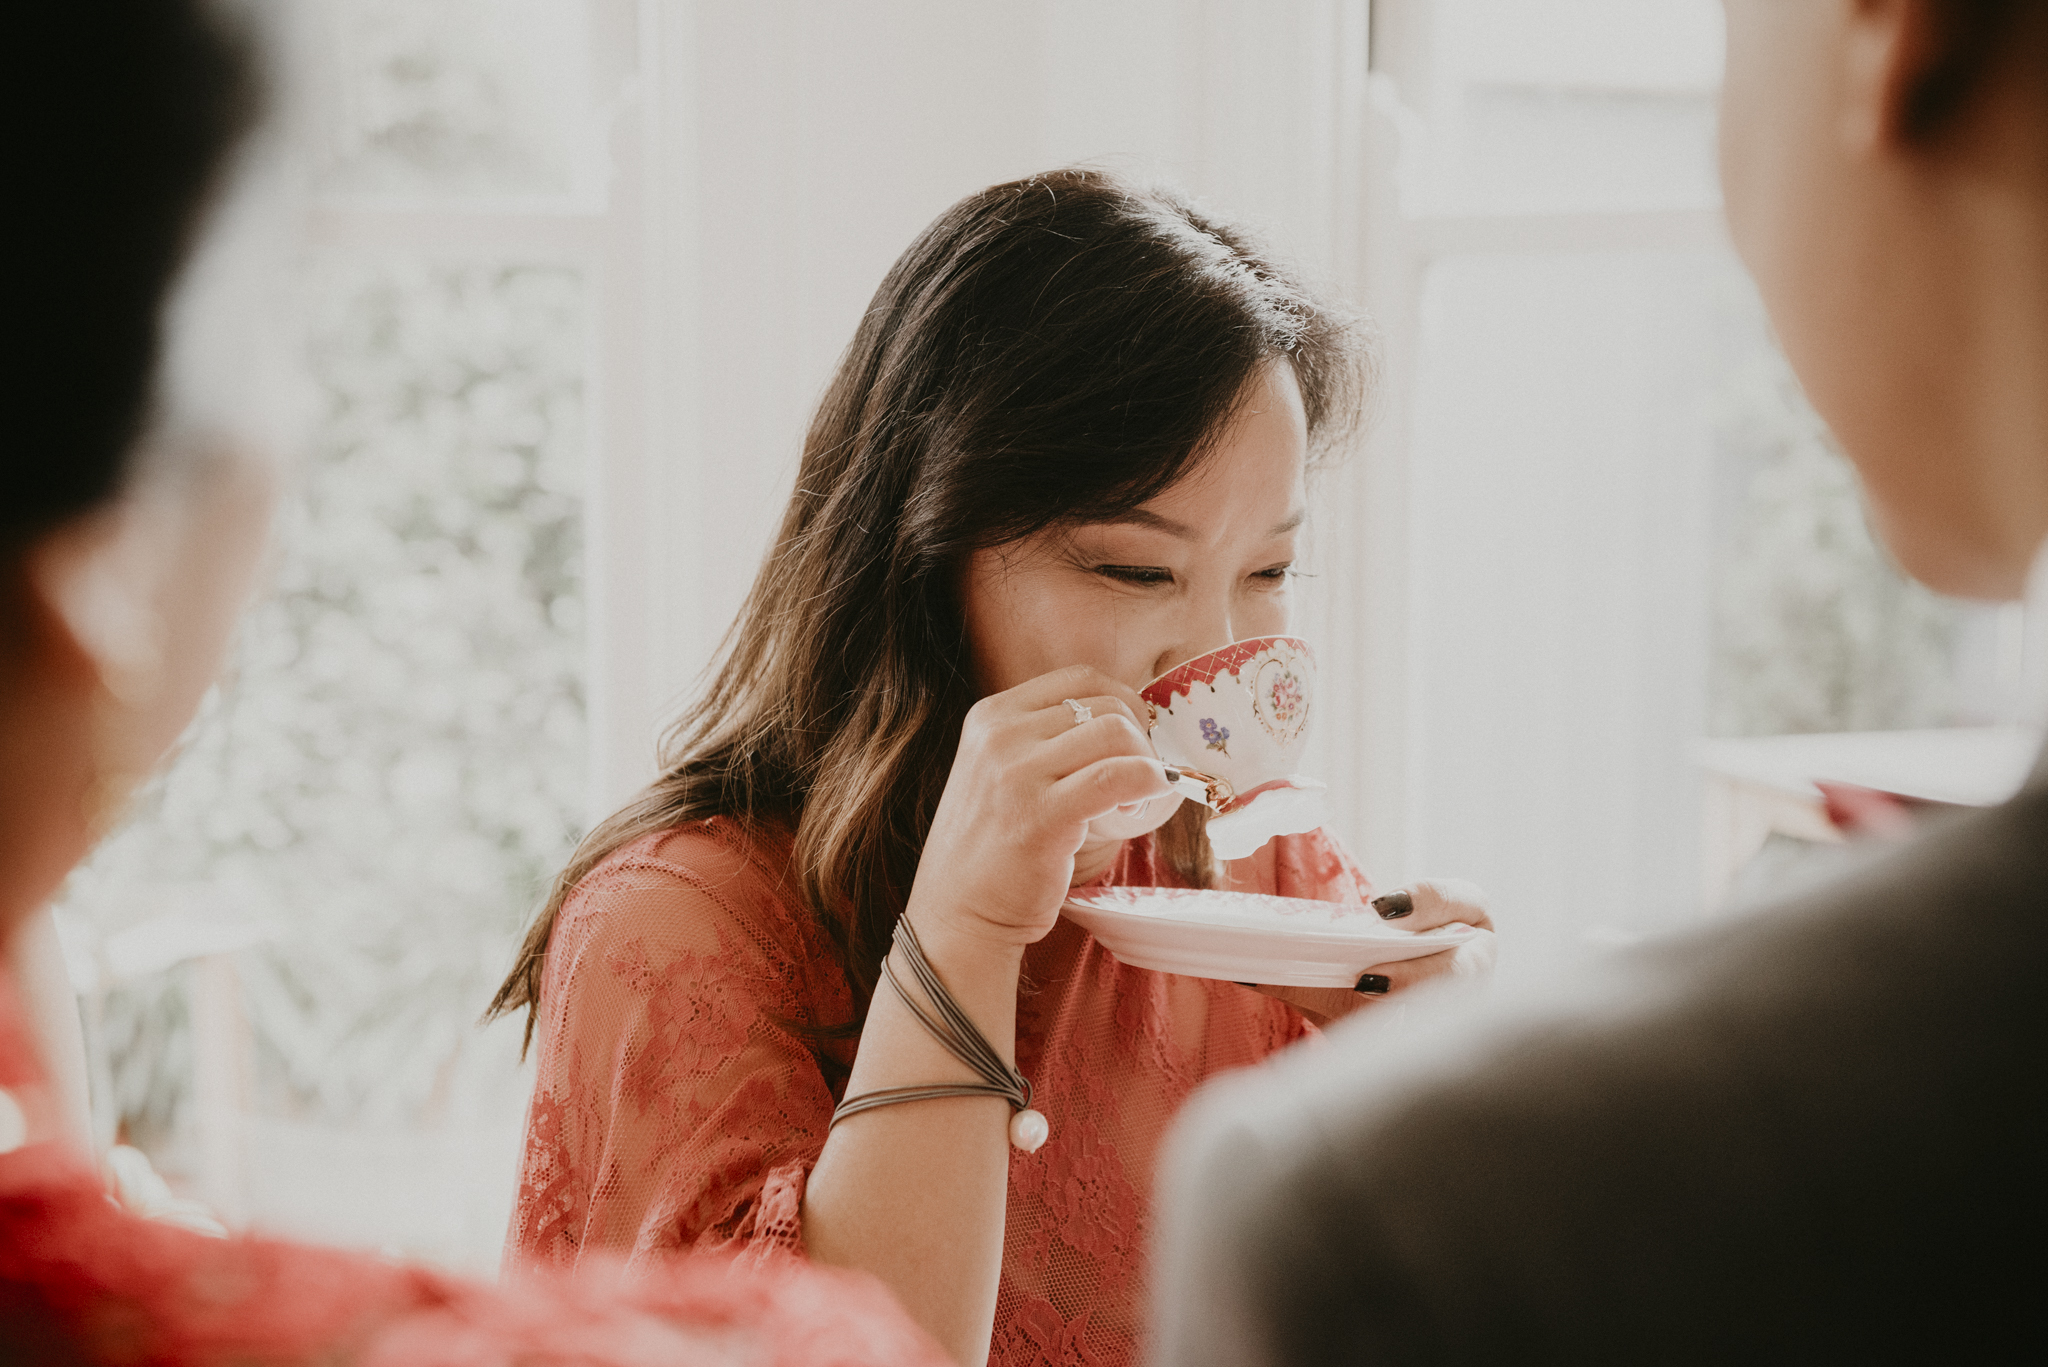 agnes-duy-15th-december-2018-chinese-vietnamese-wedding-tea-ceremony-yarraville-home-house-documentary-candid-photographer-sarah-matler-photography-31